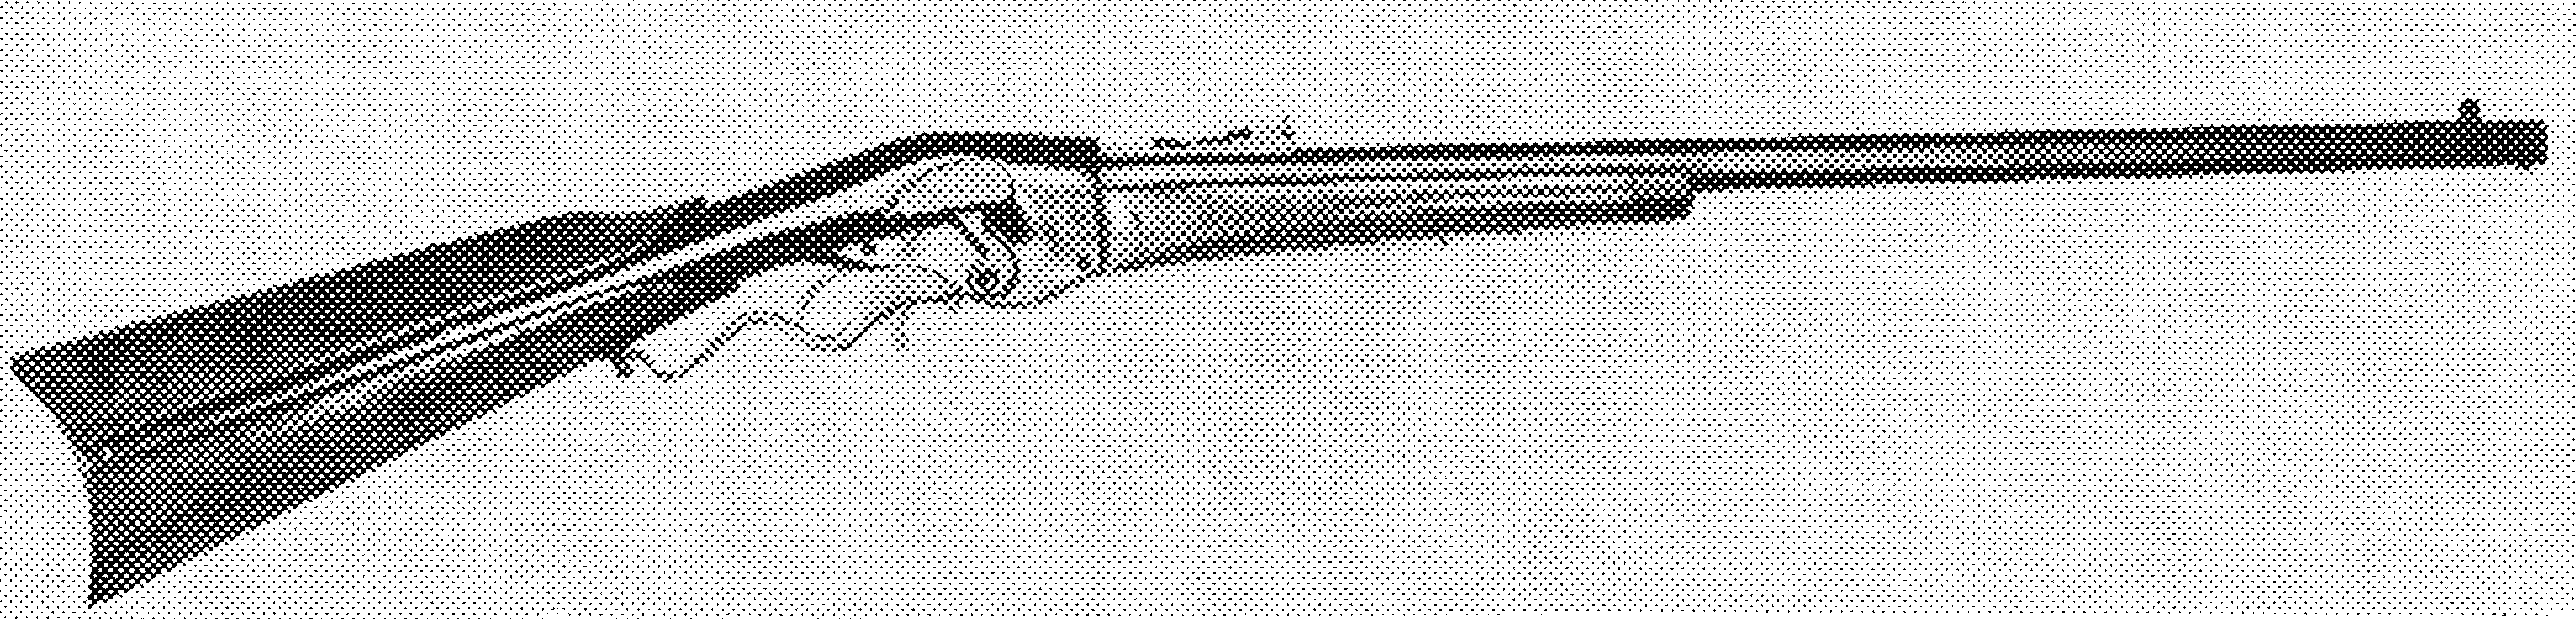 Military Musket